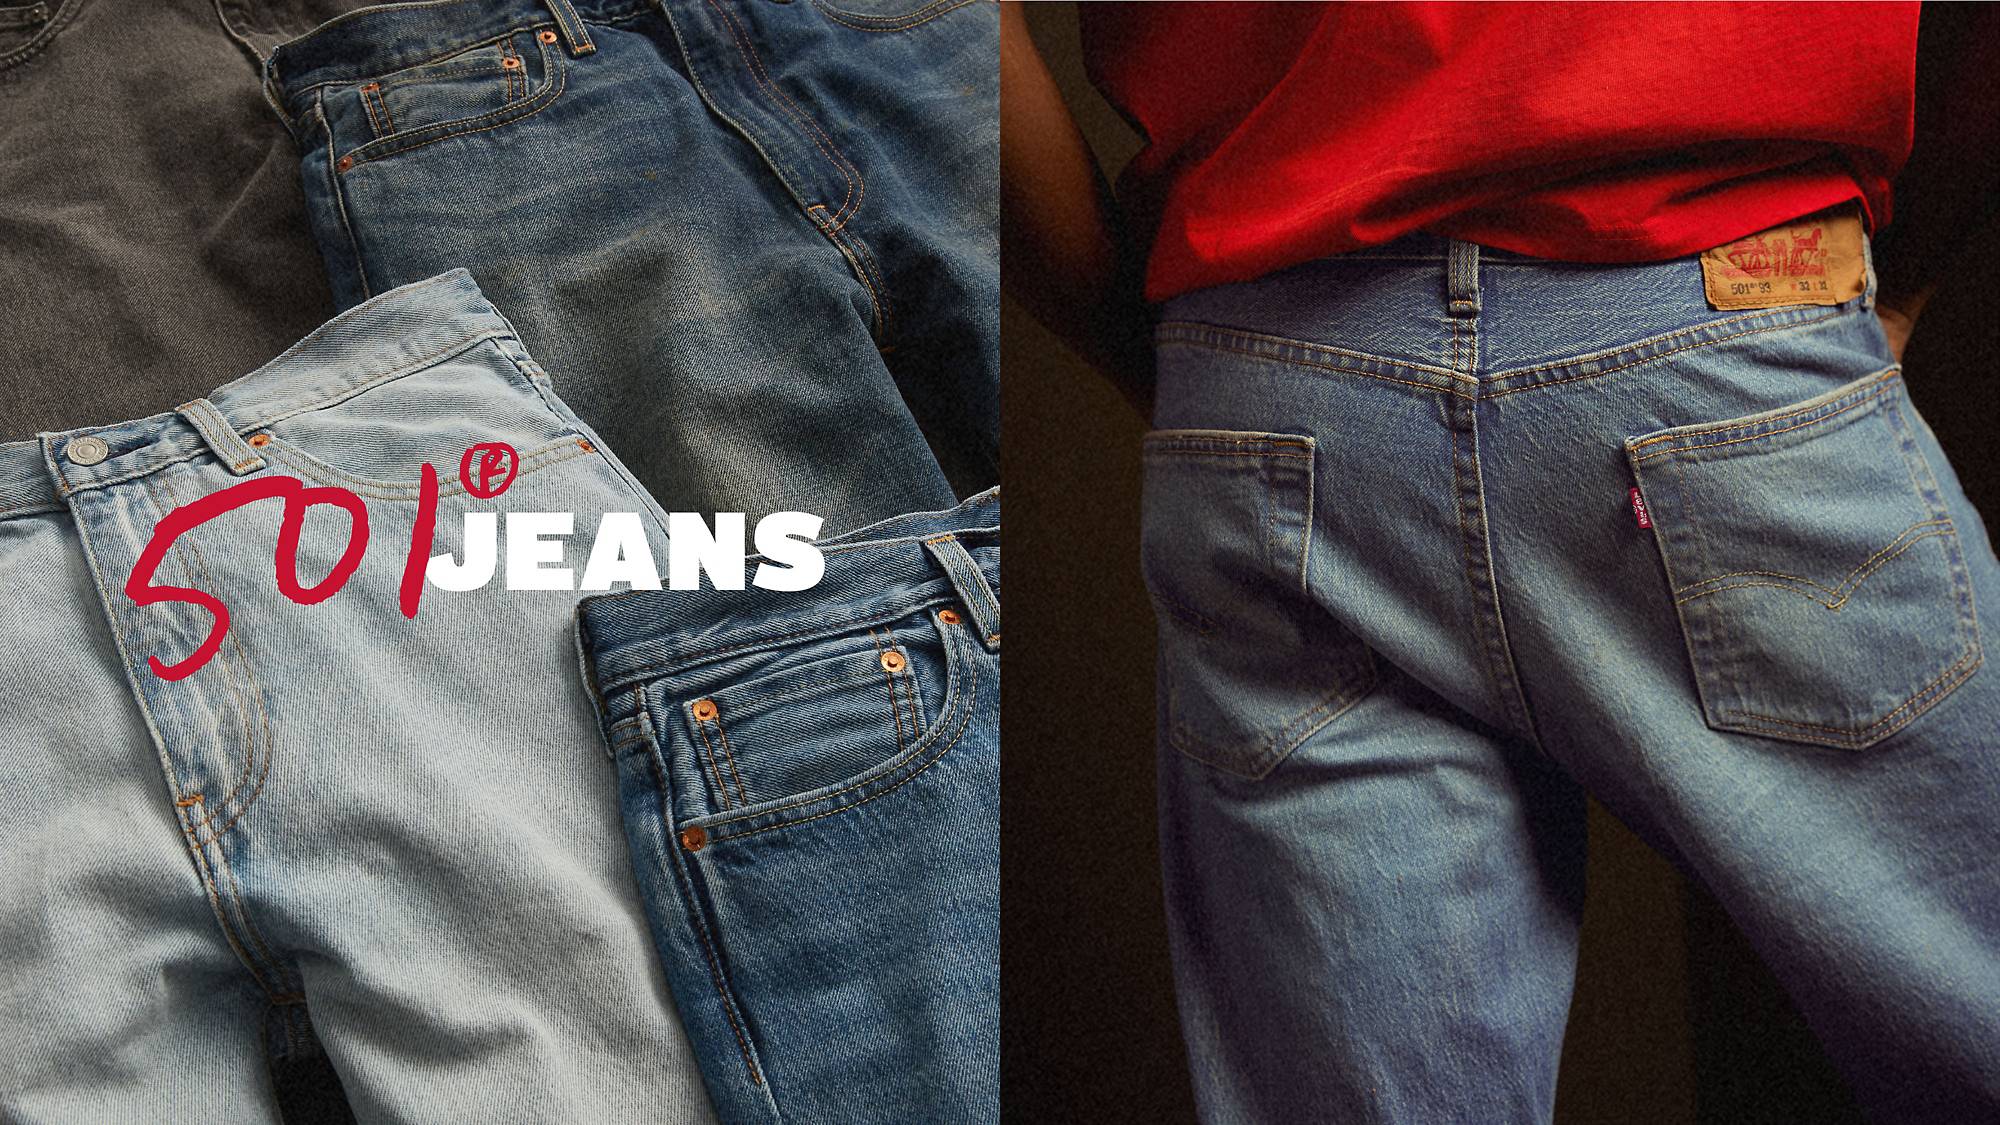 Split screen of men's 501® buttshot and multi jean flat lay with overlaid "501® Jeans" graphic lockup